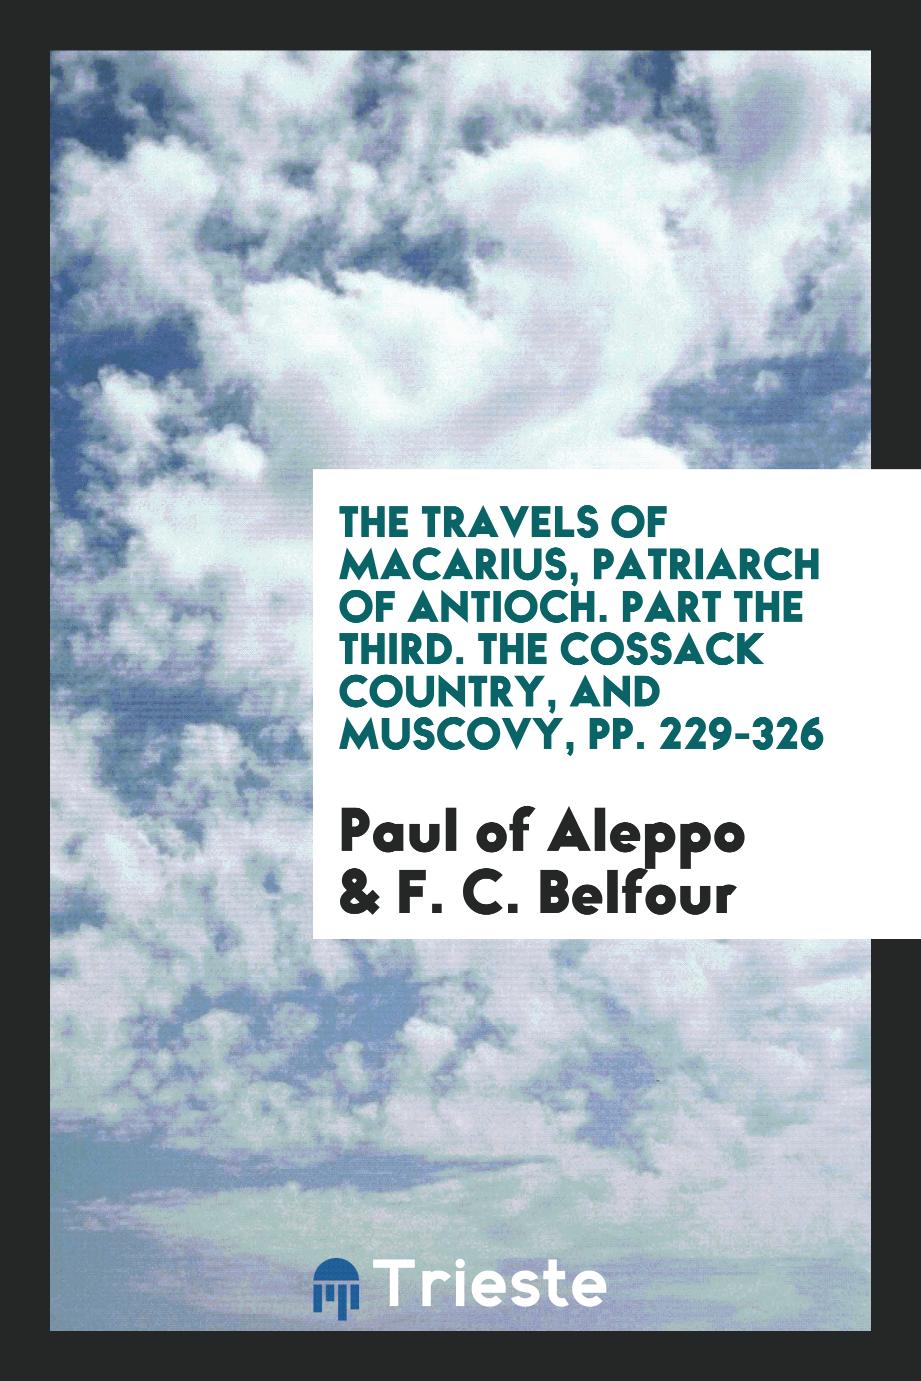 The Travels of Macarius, Patriarch of Antioch. Part the Third. The Cossack Country, and Muscovy, pp. 229-326